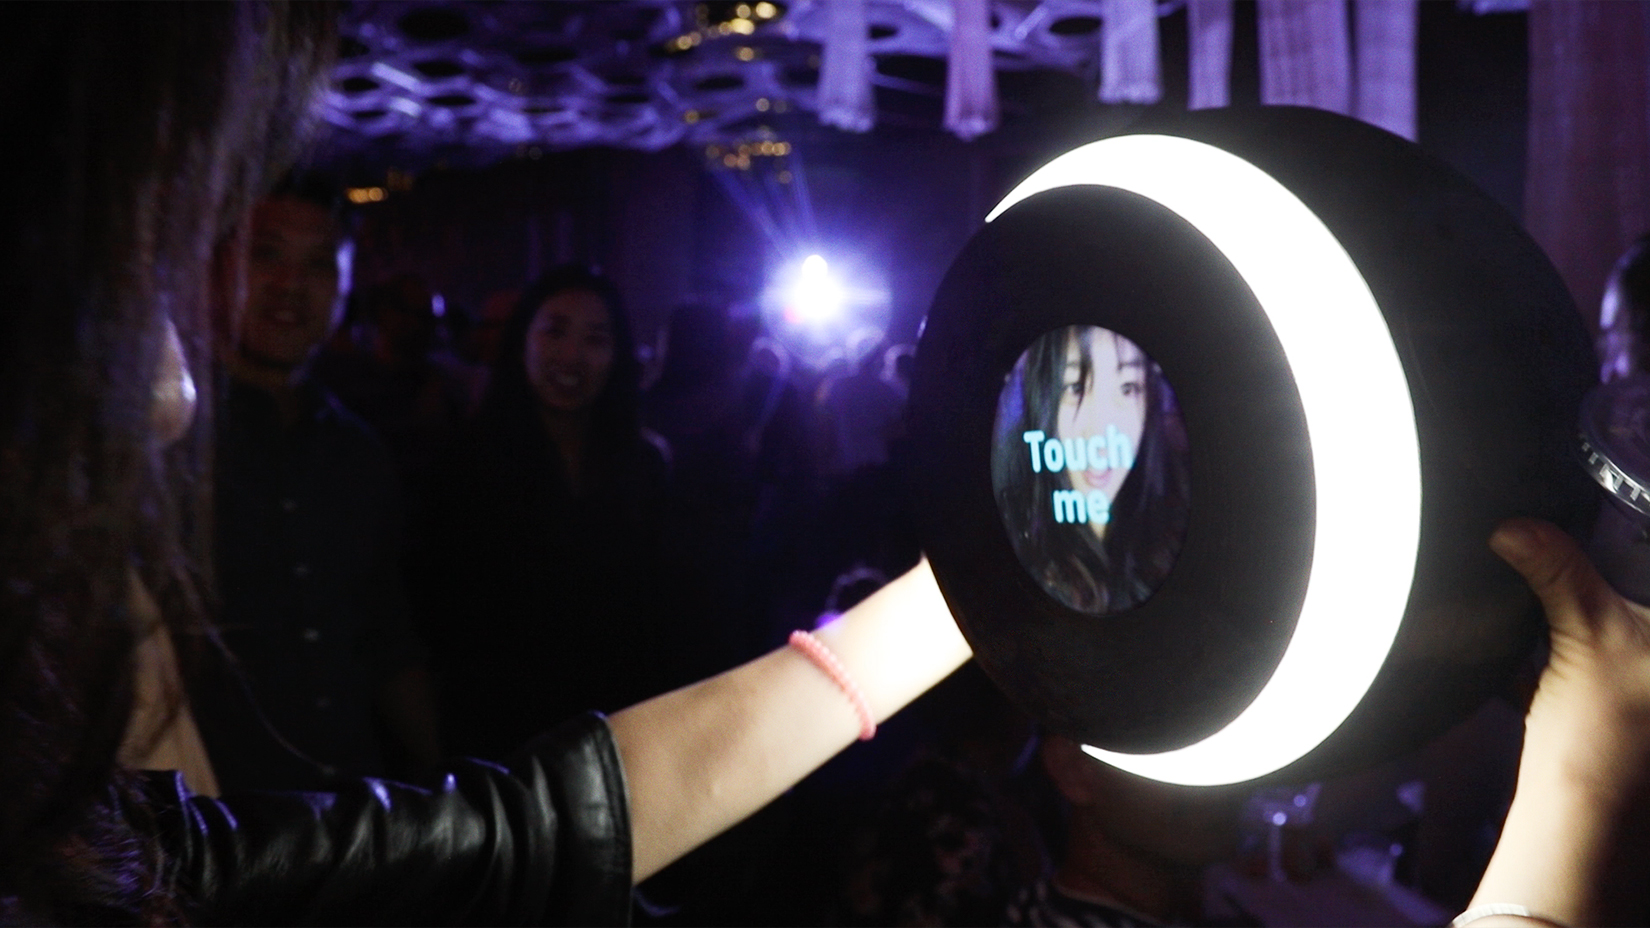 A person holding a sphere with a ring light and a camera, looking at their image on the screen